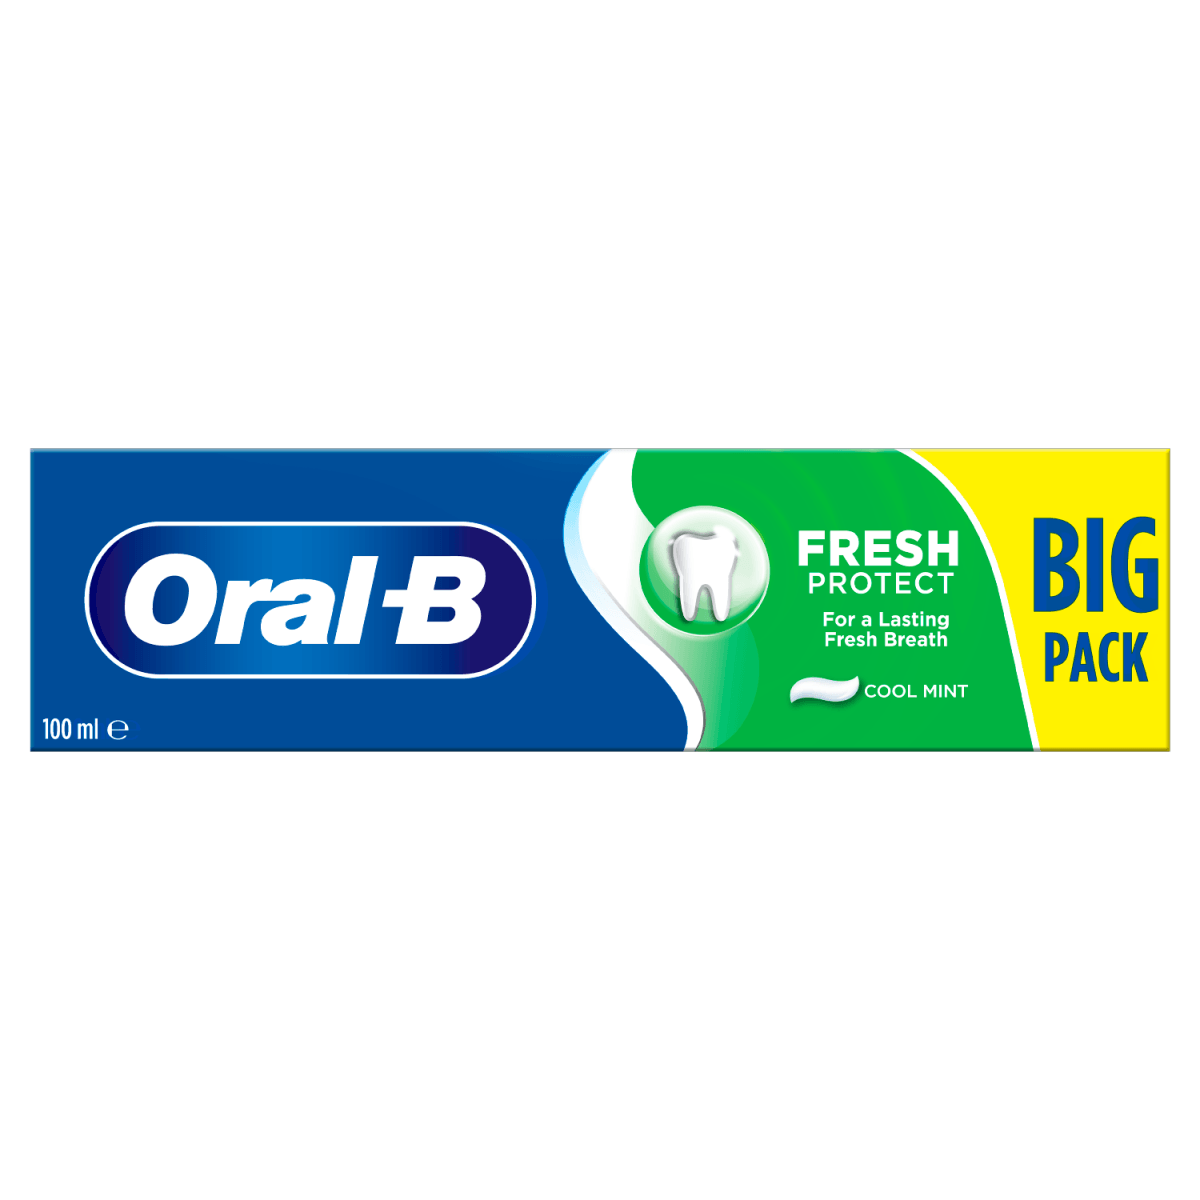 Oral B Toothpaste 1-2-3 Fresh Protect Mint - Intamarque 5013965953354